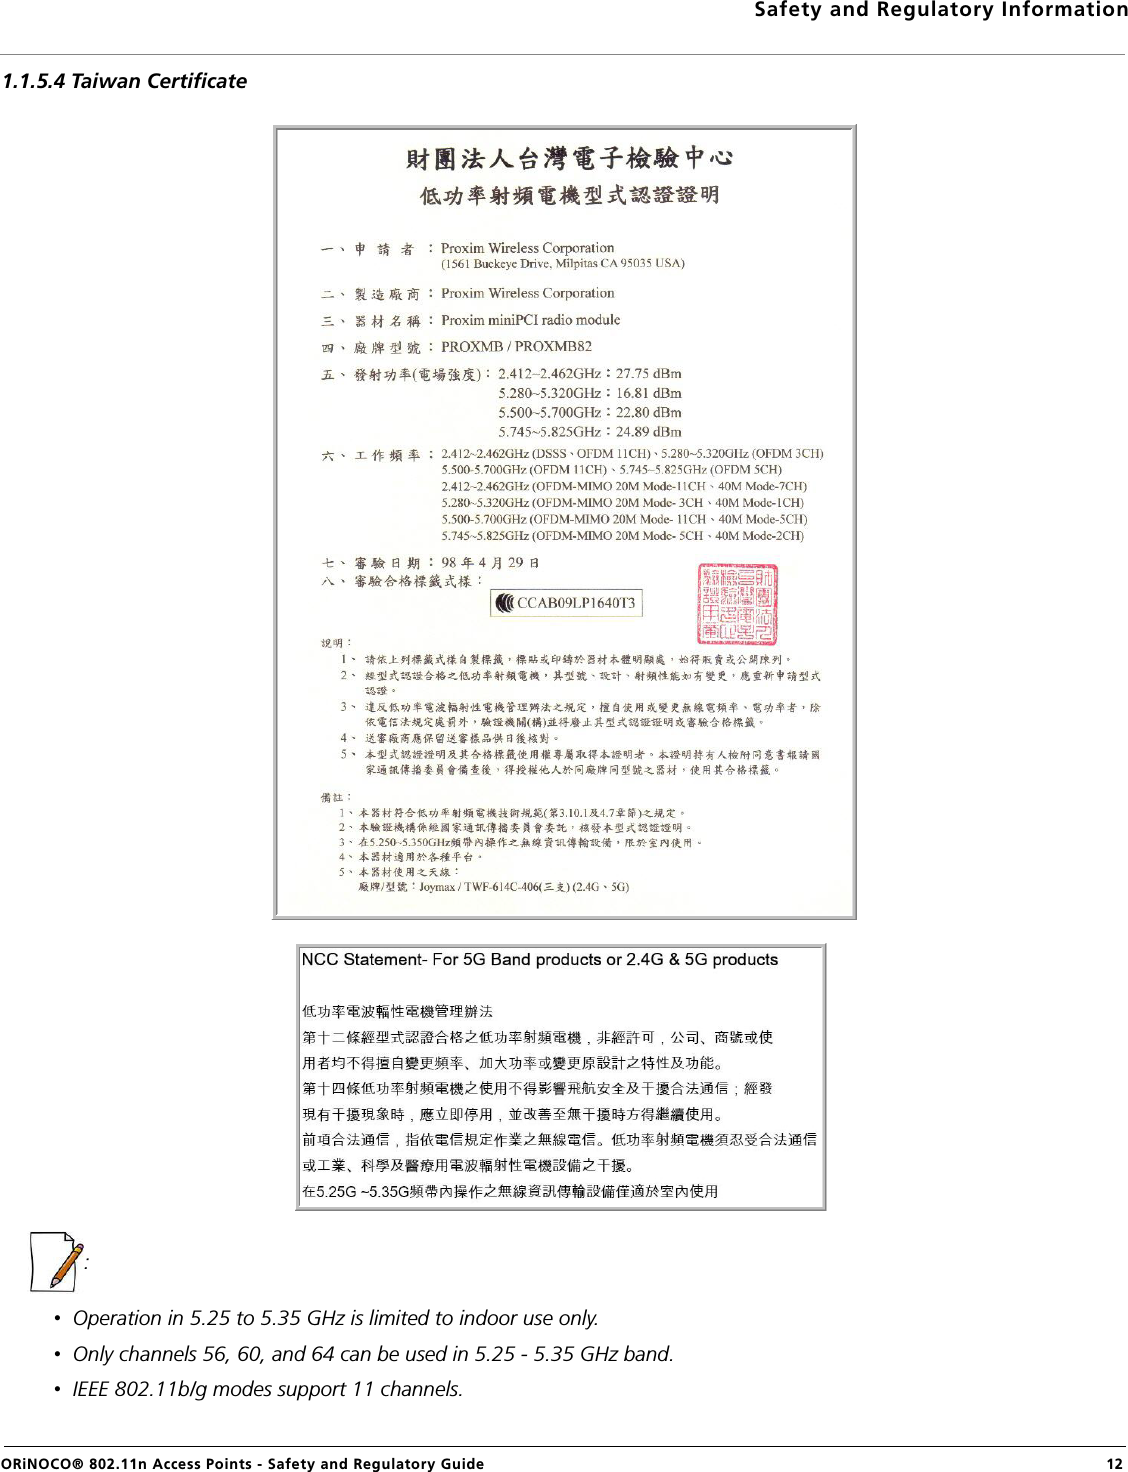 Safety and Regulatory InformationORiNOCO® 802.11n Access Points - Safety and Regulatory Guide  121.1.5.4 Taiwan Certificate: •  Operation in 5.25 to 5.35 GHz is limited to indoor use only.•  Only channels 56, 60, and 64 can be used in 5.25 - 5.35 GHz band.•  IEEE 802.11b/g modes support 11 channels.